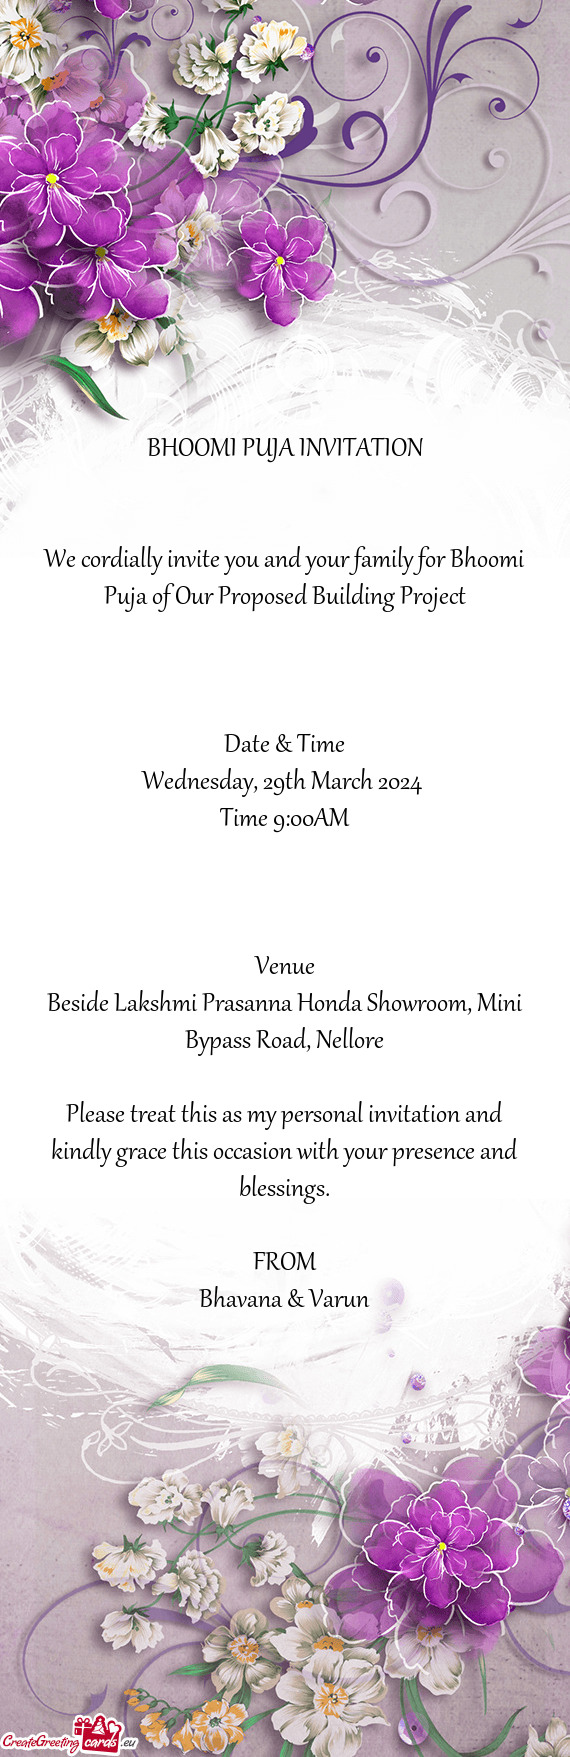 We cordially invite you and your family for Bhoomi Puja of Our Proposed Building Project